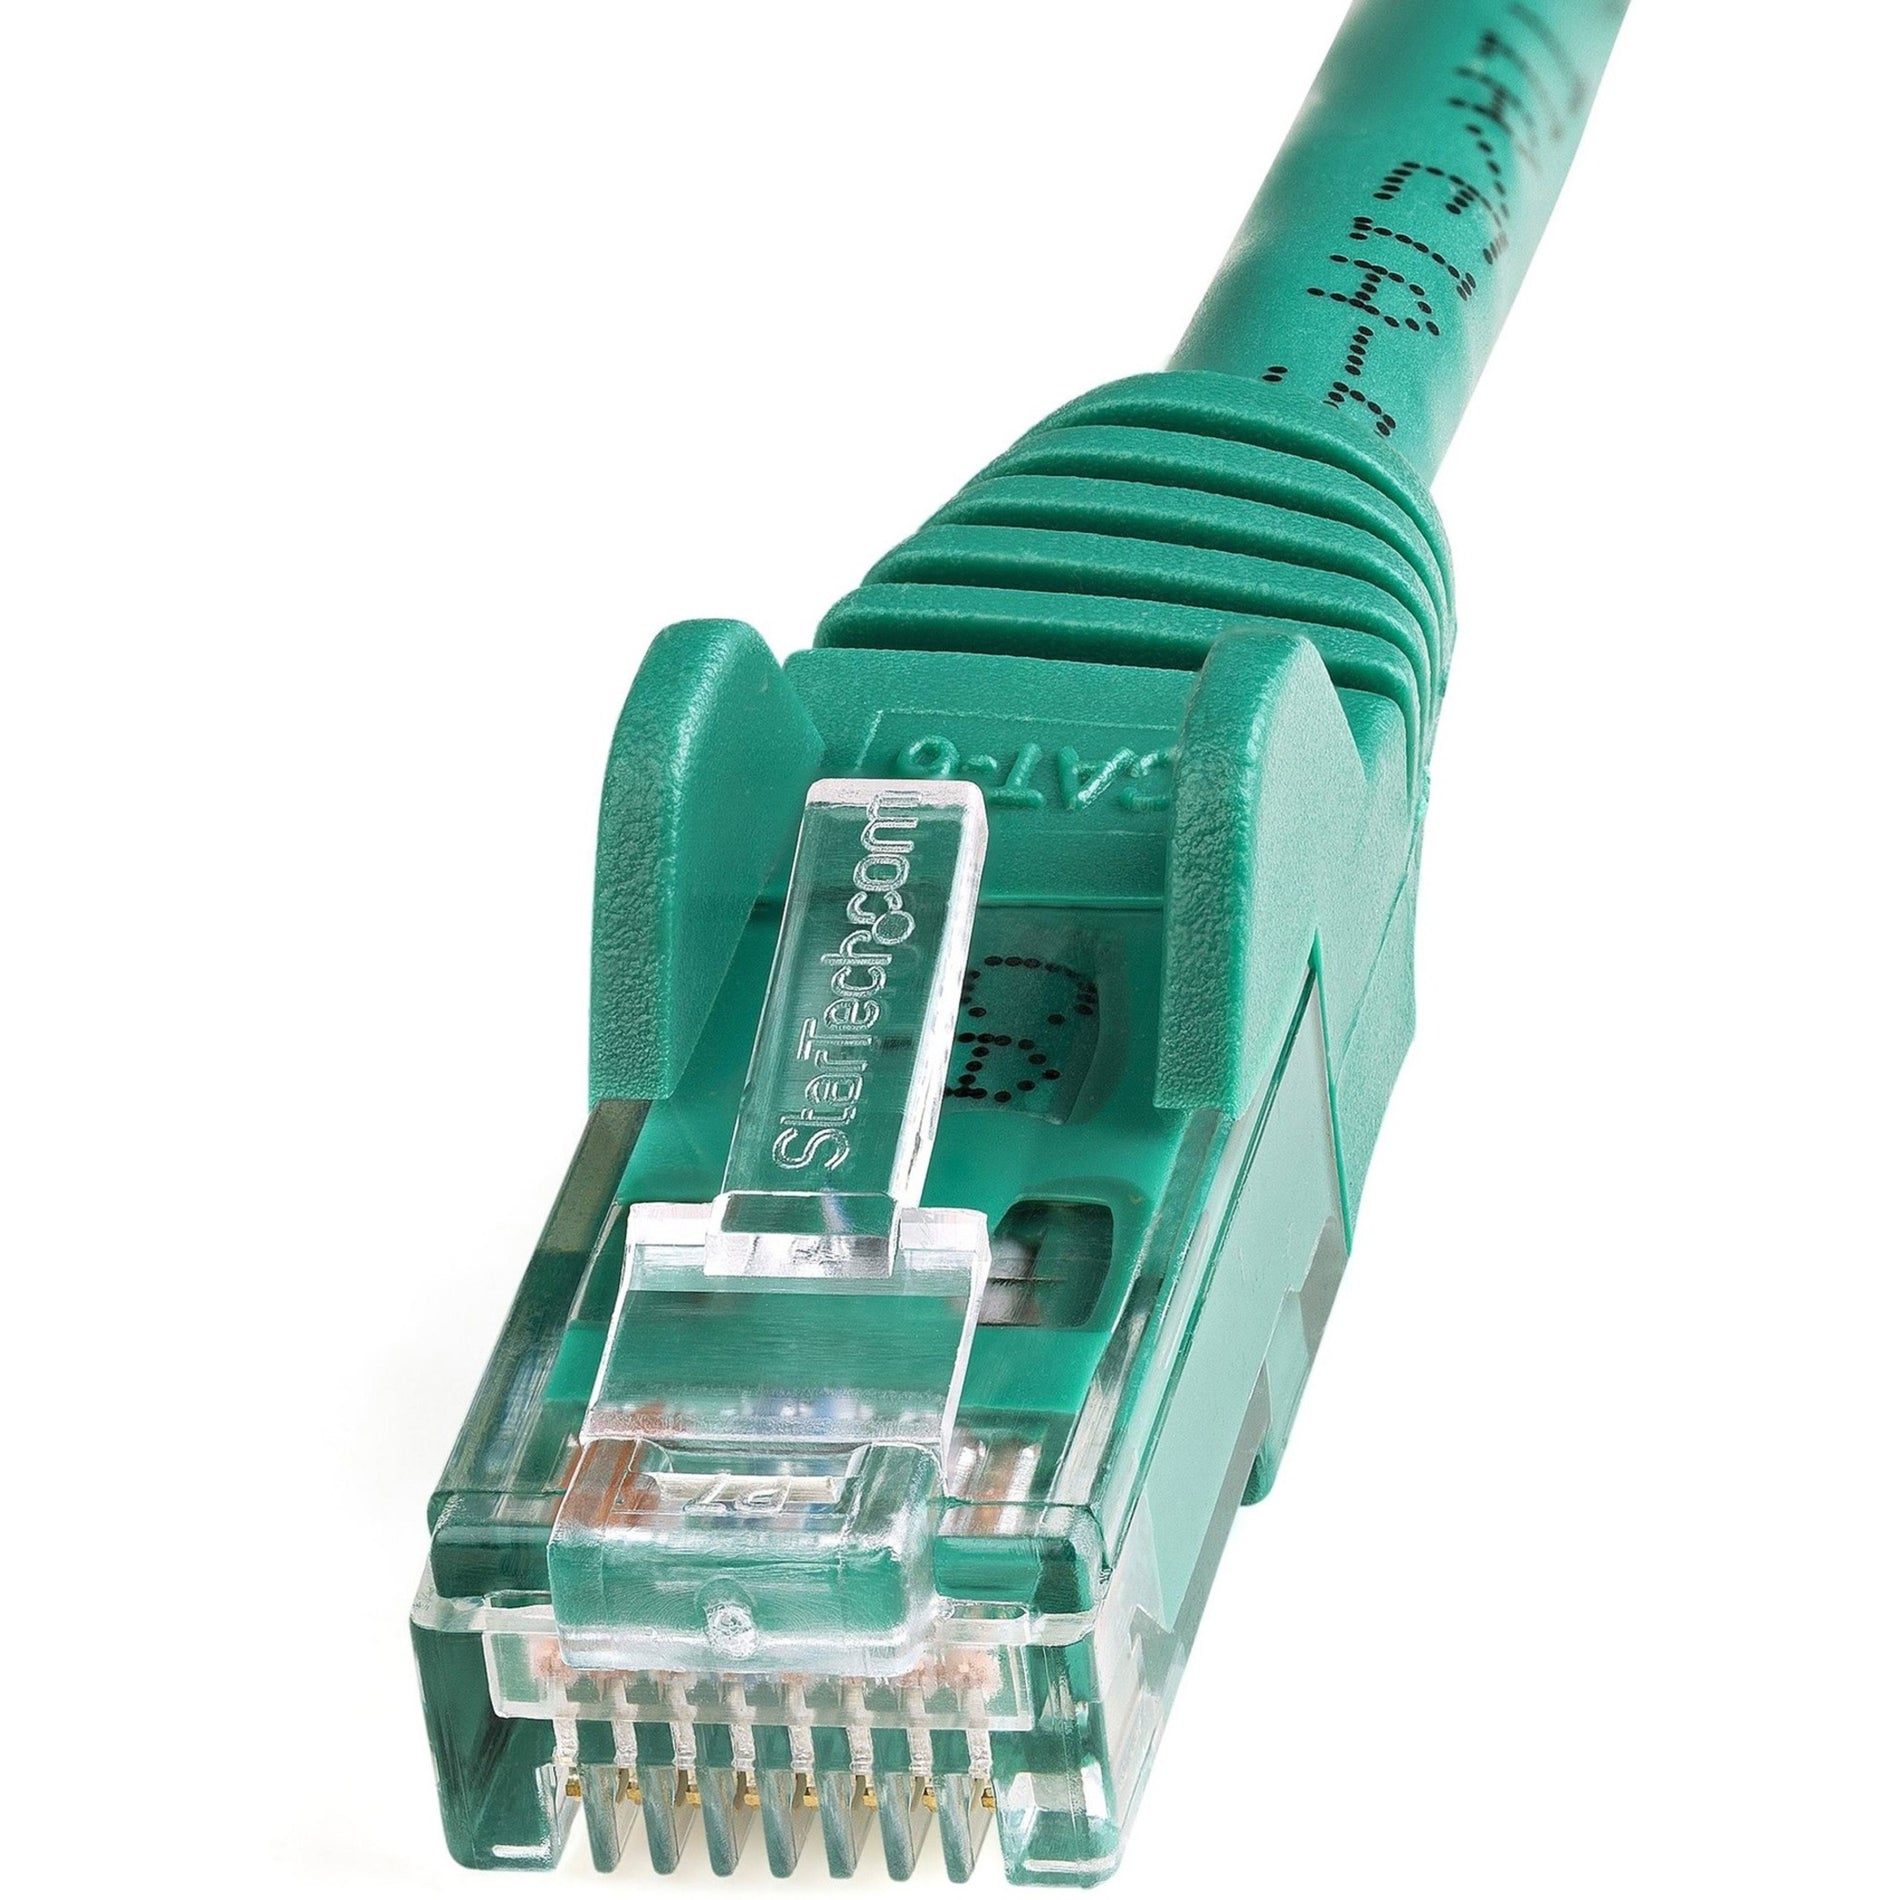 StarTech.com N6PATCH6GN Cat6 Patch Cable, 6 ft Green Ethernet Cable, Snagless RJ45 Connectors